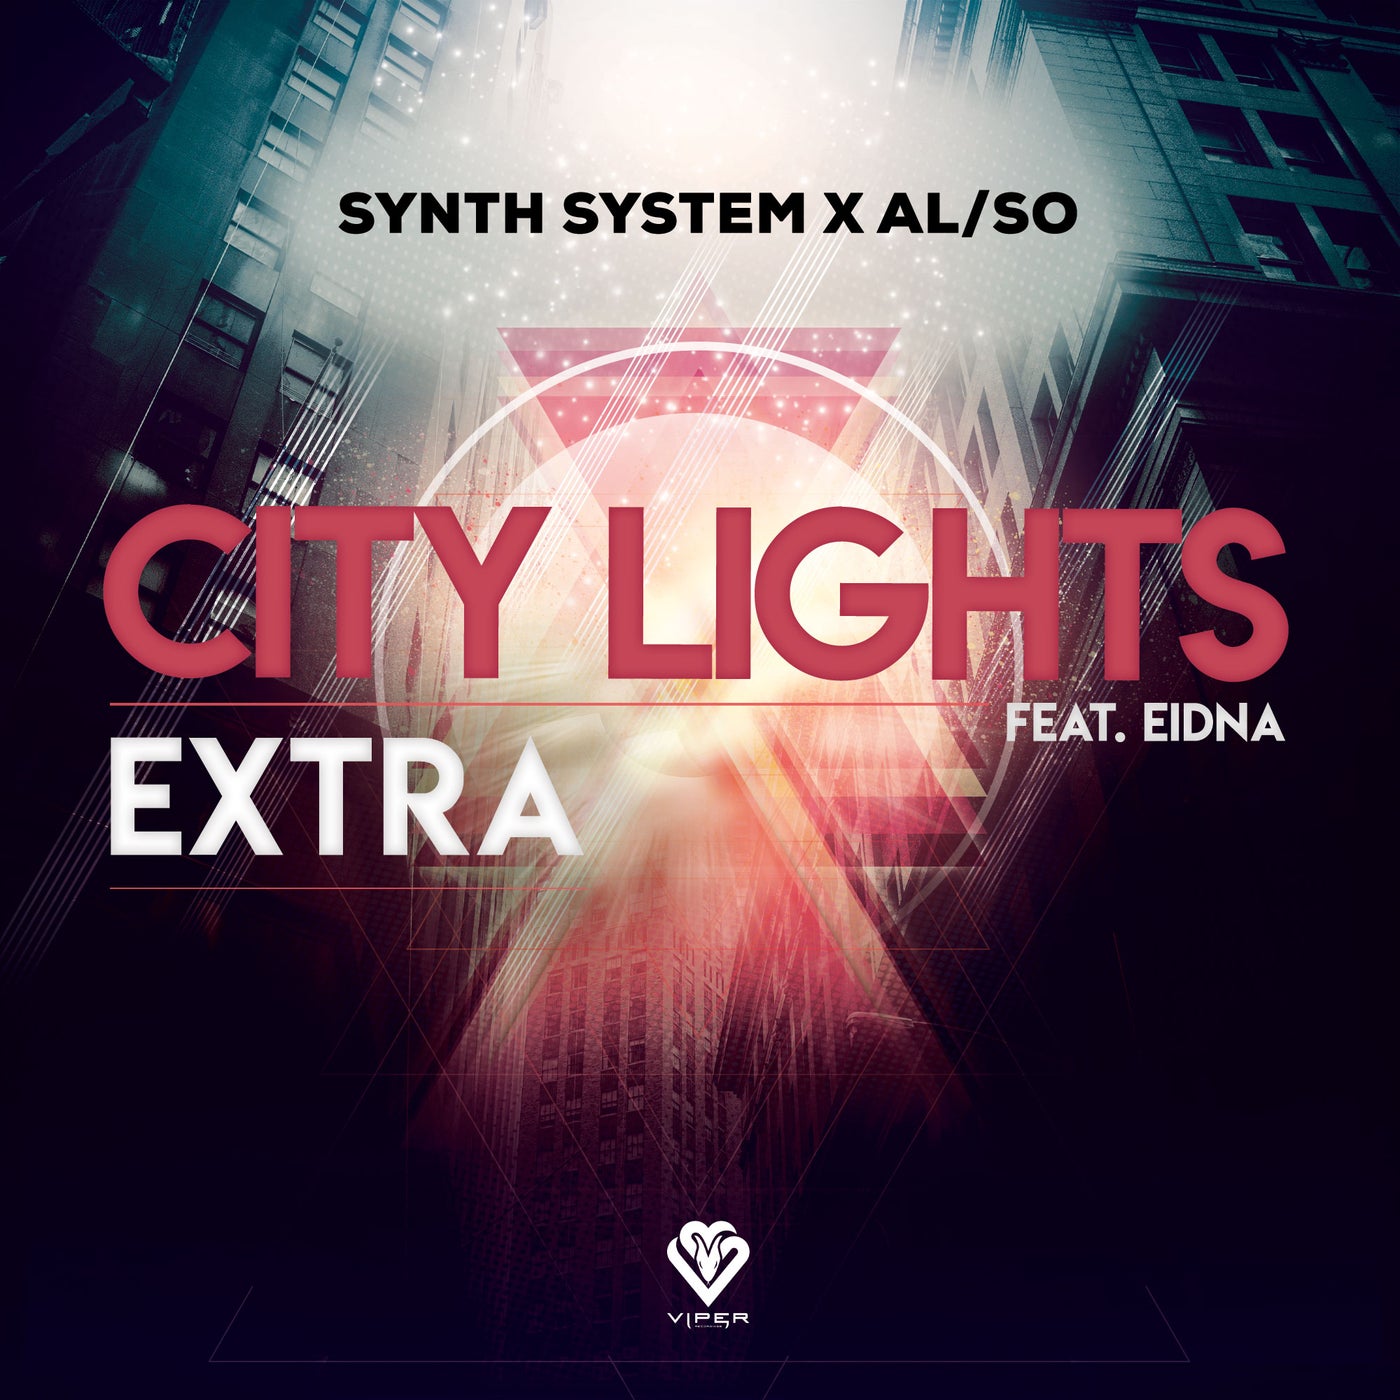 City Lights / Extra from Viper Recordings on Beatport